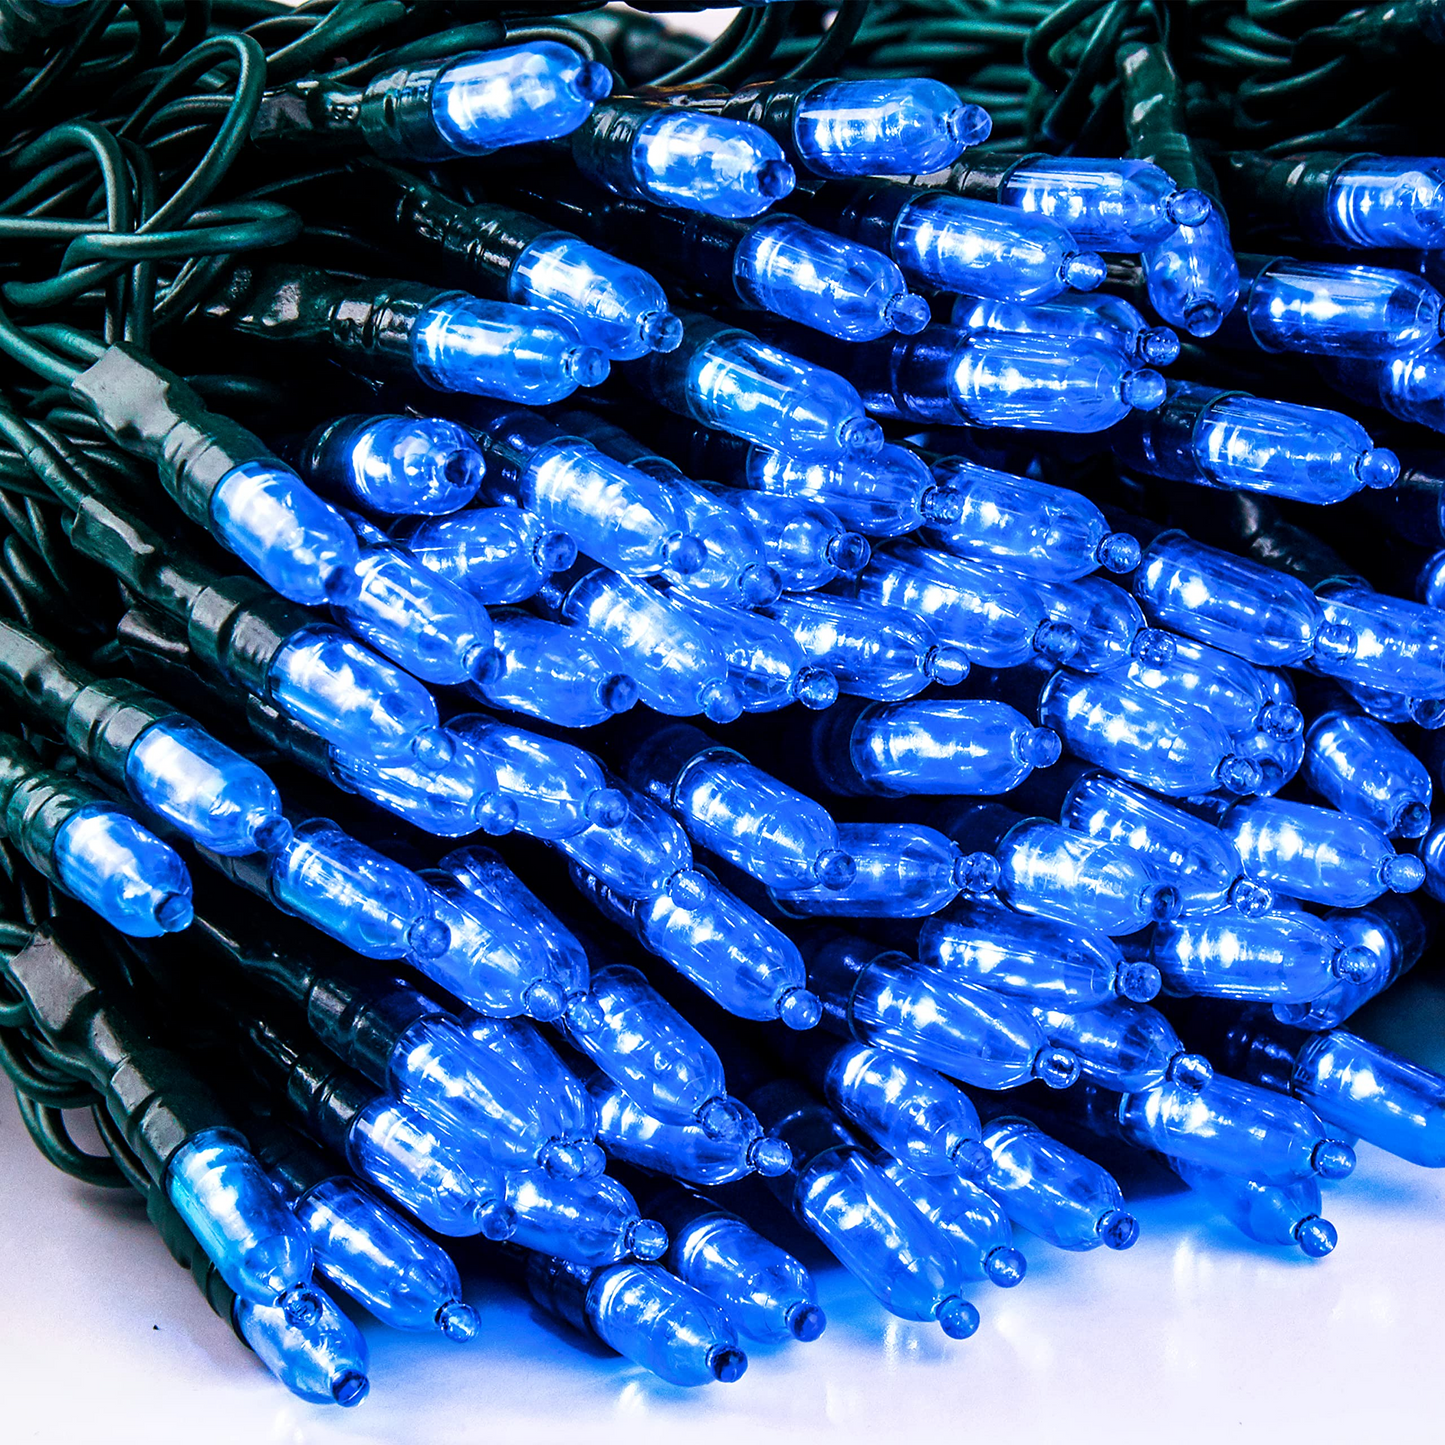 100-Count 34.6ft LED Blue Halloween String Lights with 8 Lighting Modes